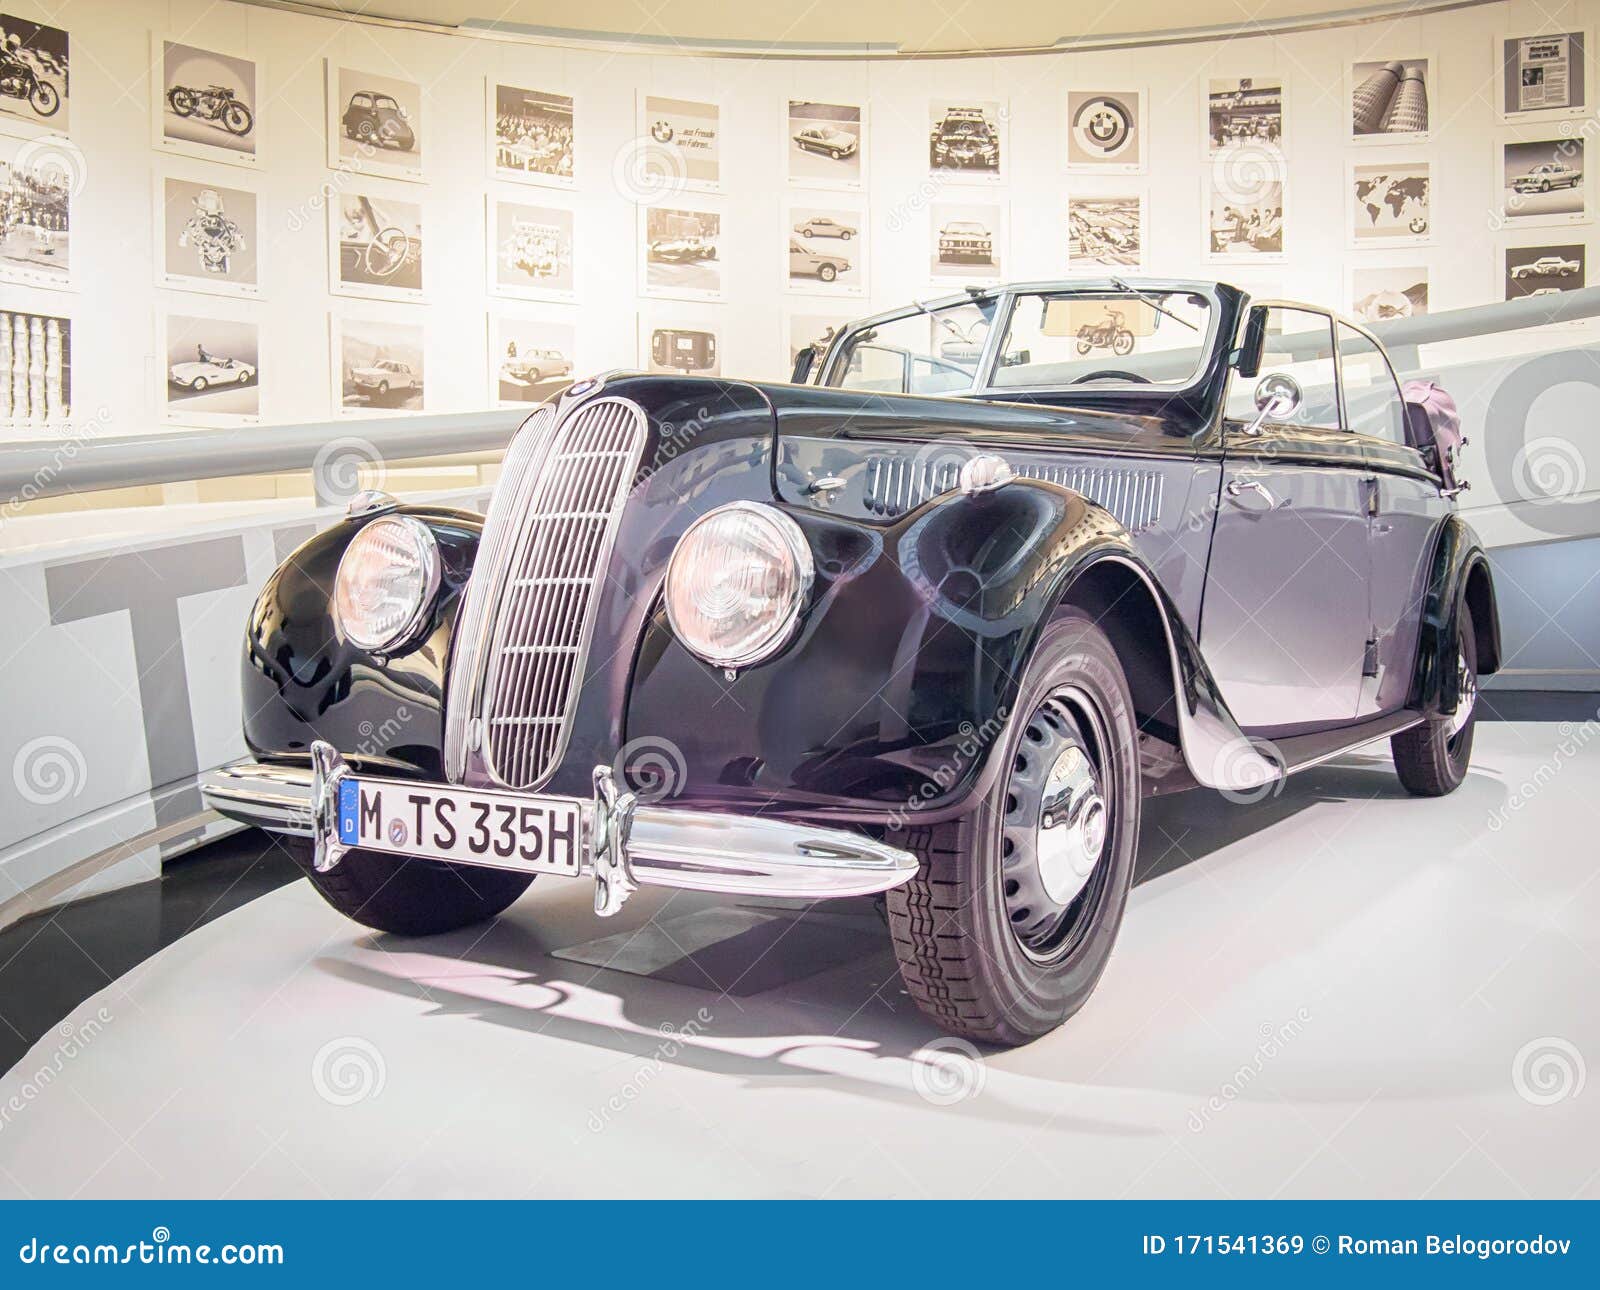 1939 BMW 335 editorial stock image. Image of industry - 171541369